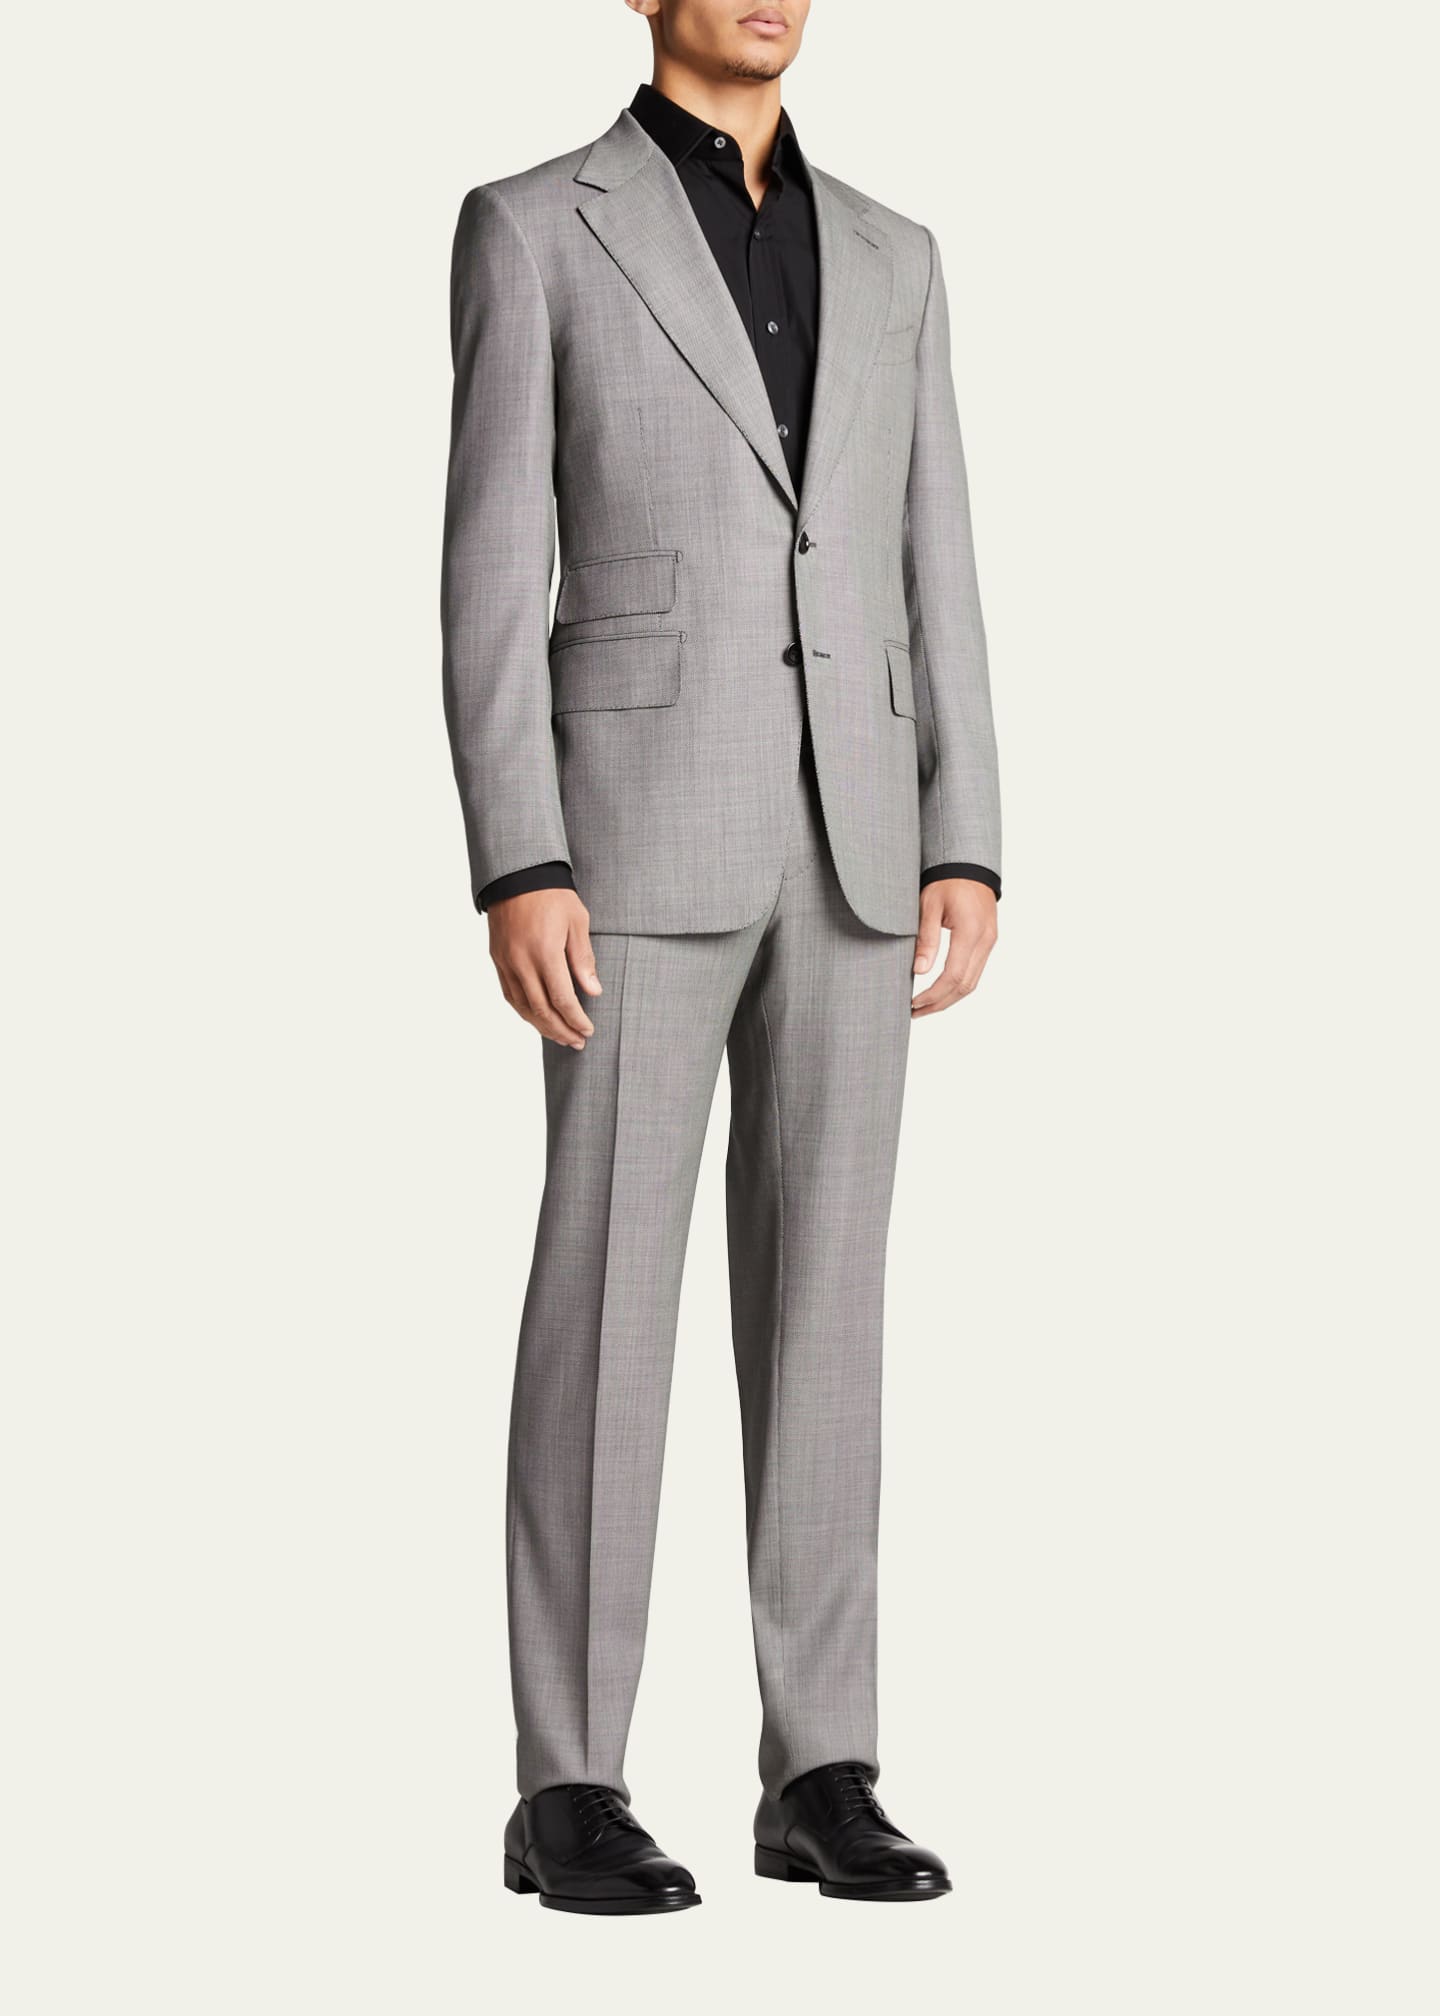 TOM FORD Men's Solid Wool Two-Piece Suit - Bergdorf Goodman